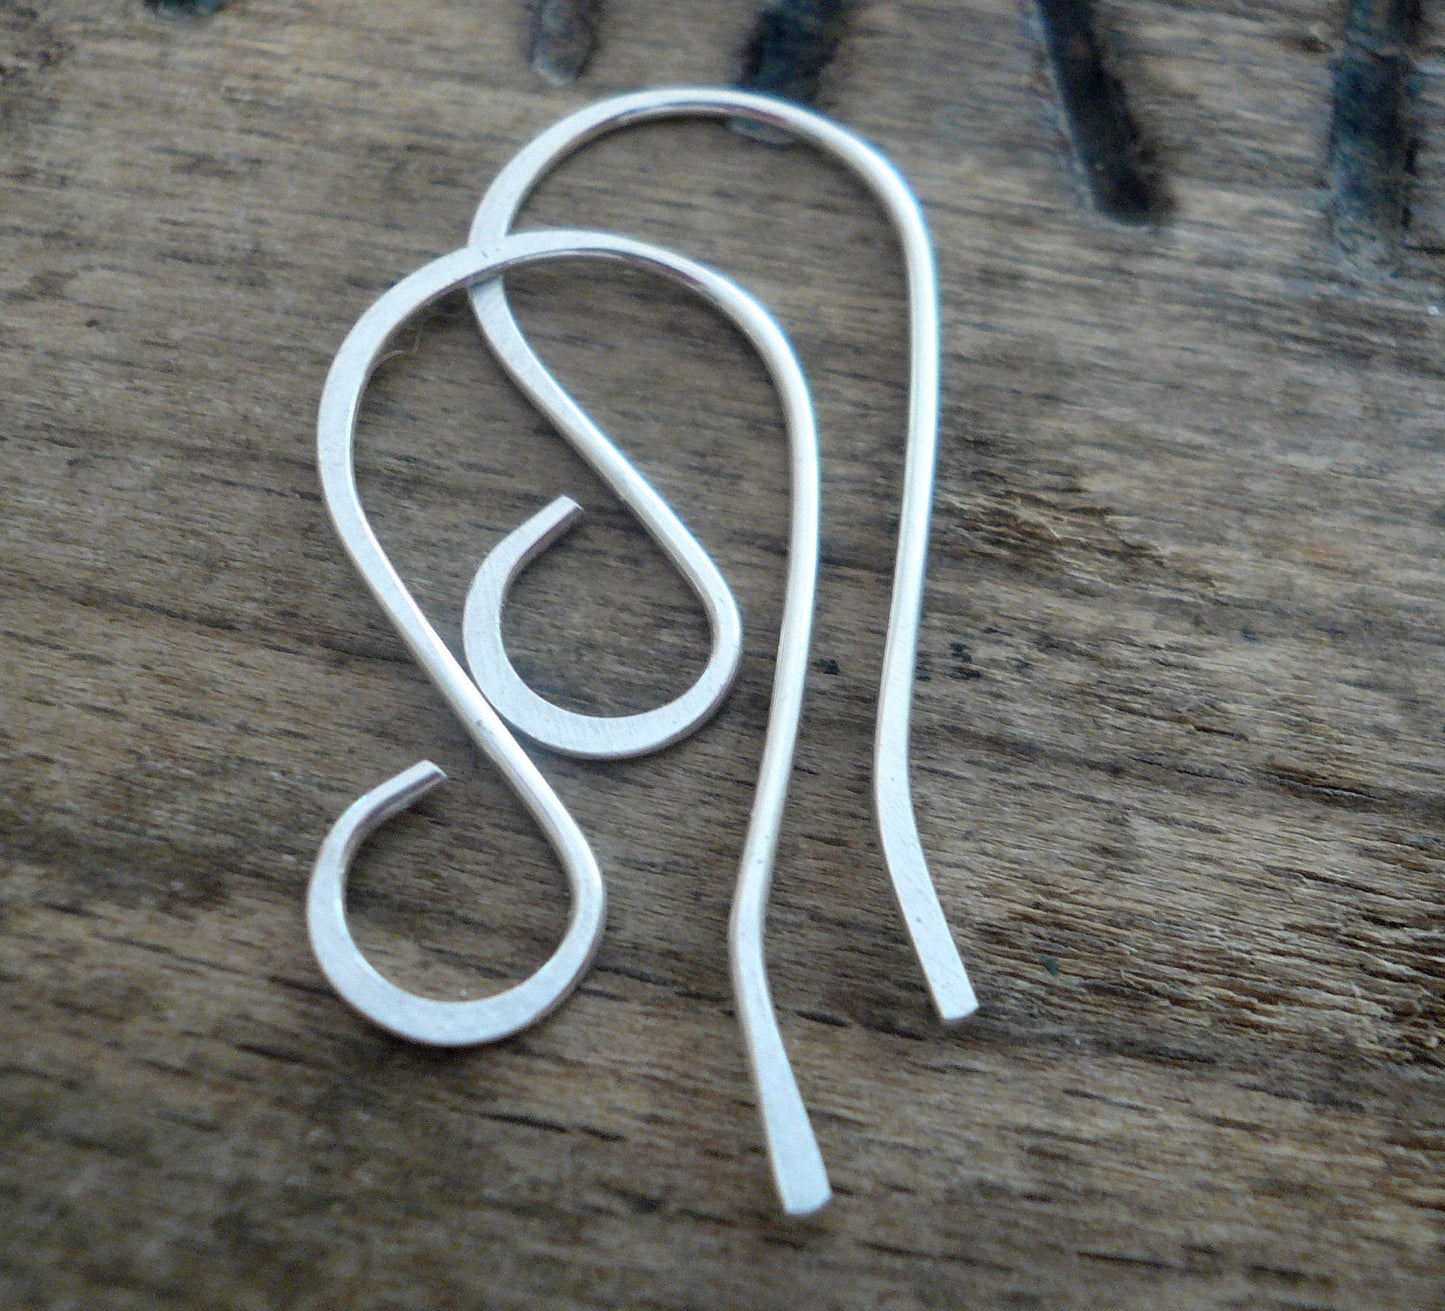 12 Pairs of my Large Loop Solitaire Sterling Silver or 14kt Goldfill Earwires - Handmade. Handforged